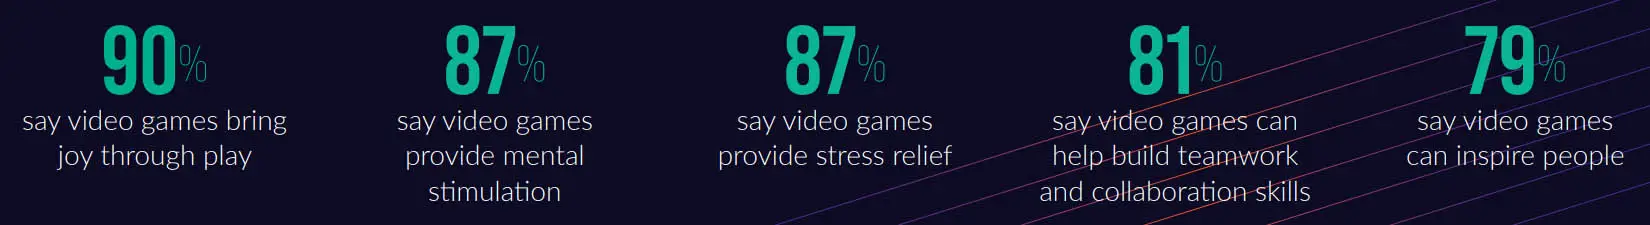 text percentages and explanations of how video games impact lives in a positive way